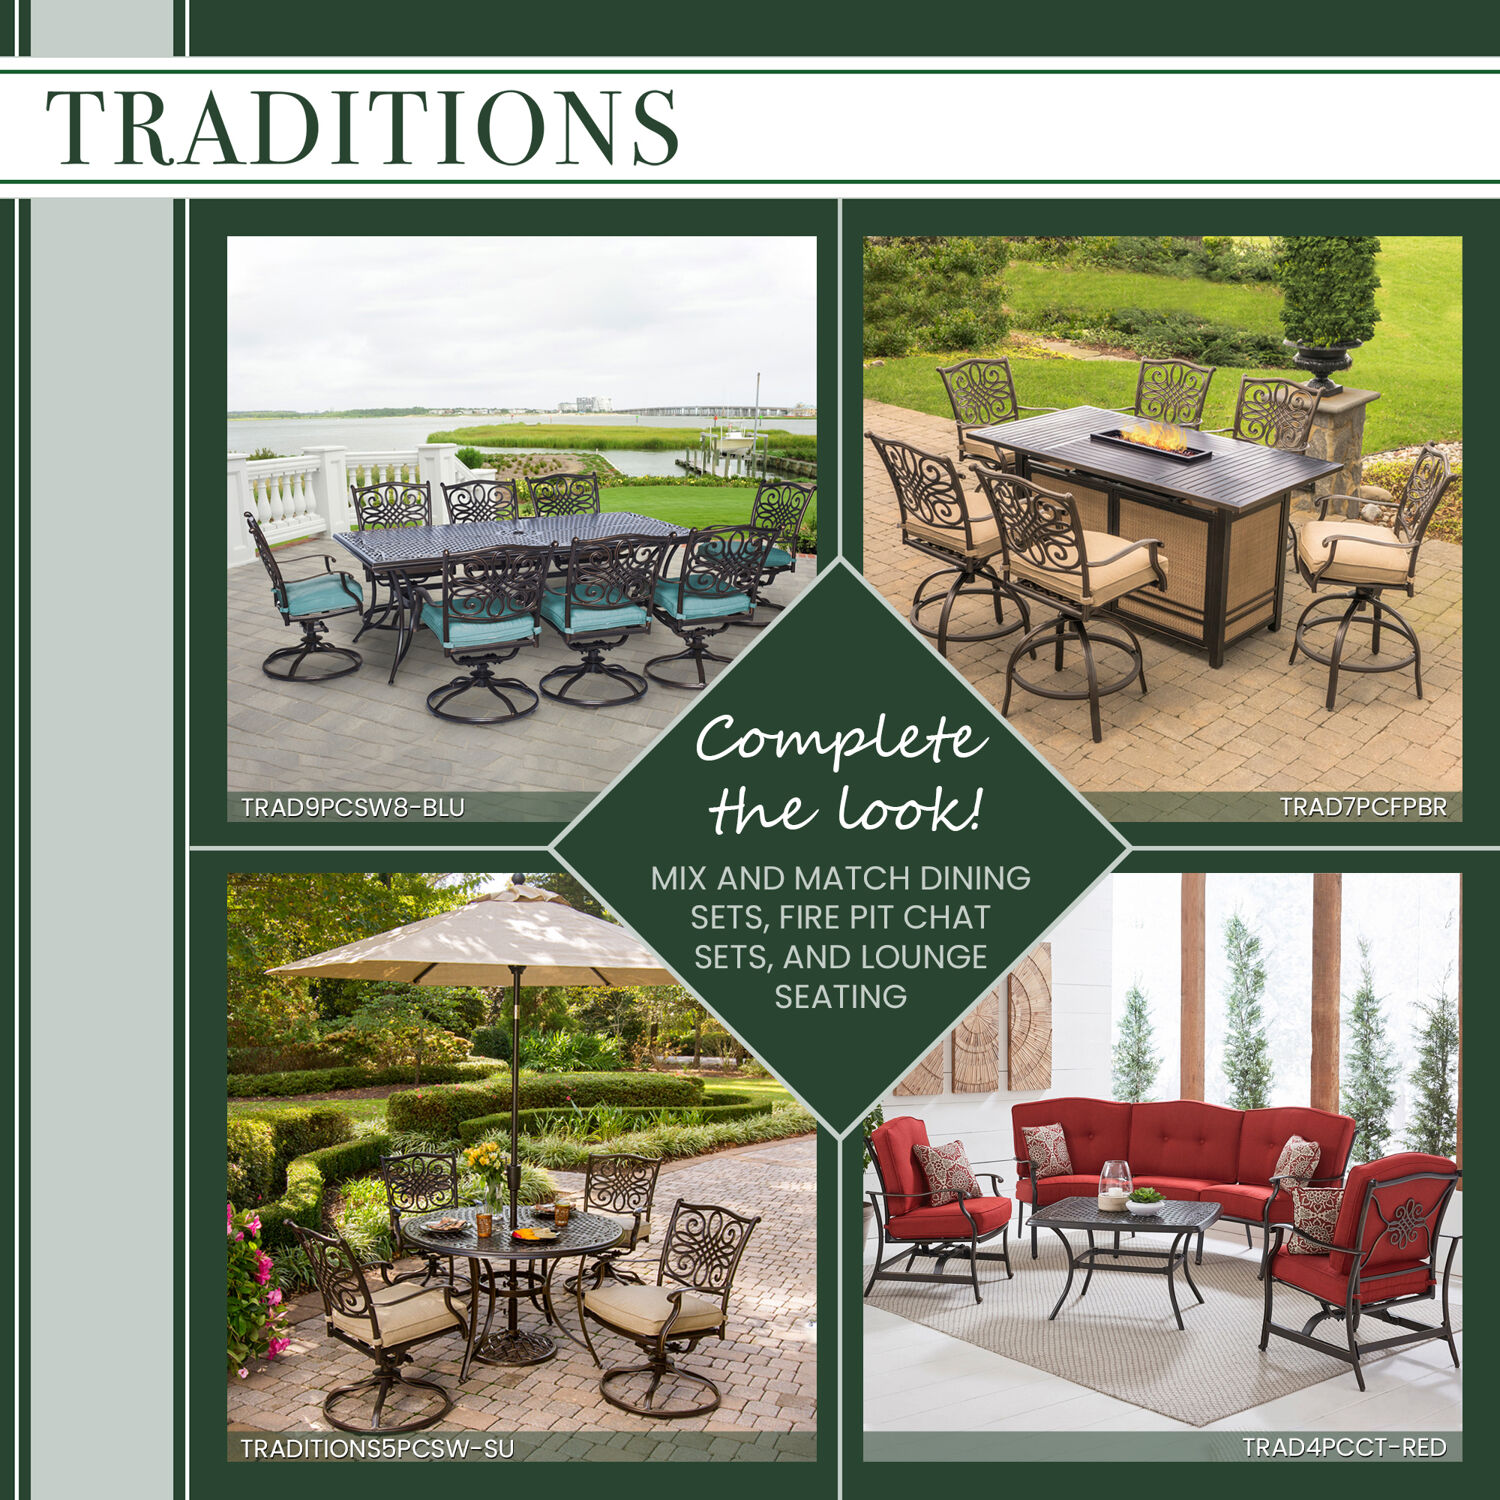 Hanover Traditions 3-Piece Outdoor Patio Bistro Set, 2 Aluminum Chairs and 30" Round Glass Table - image 5 of 9